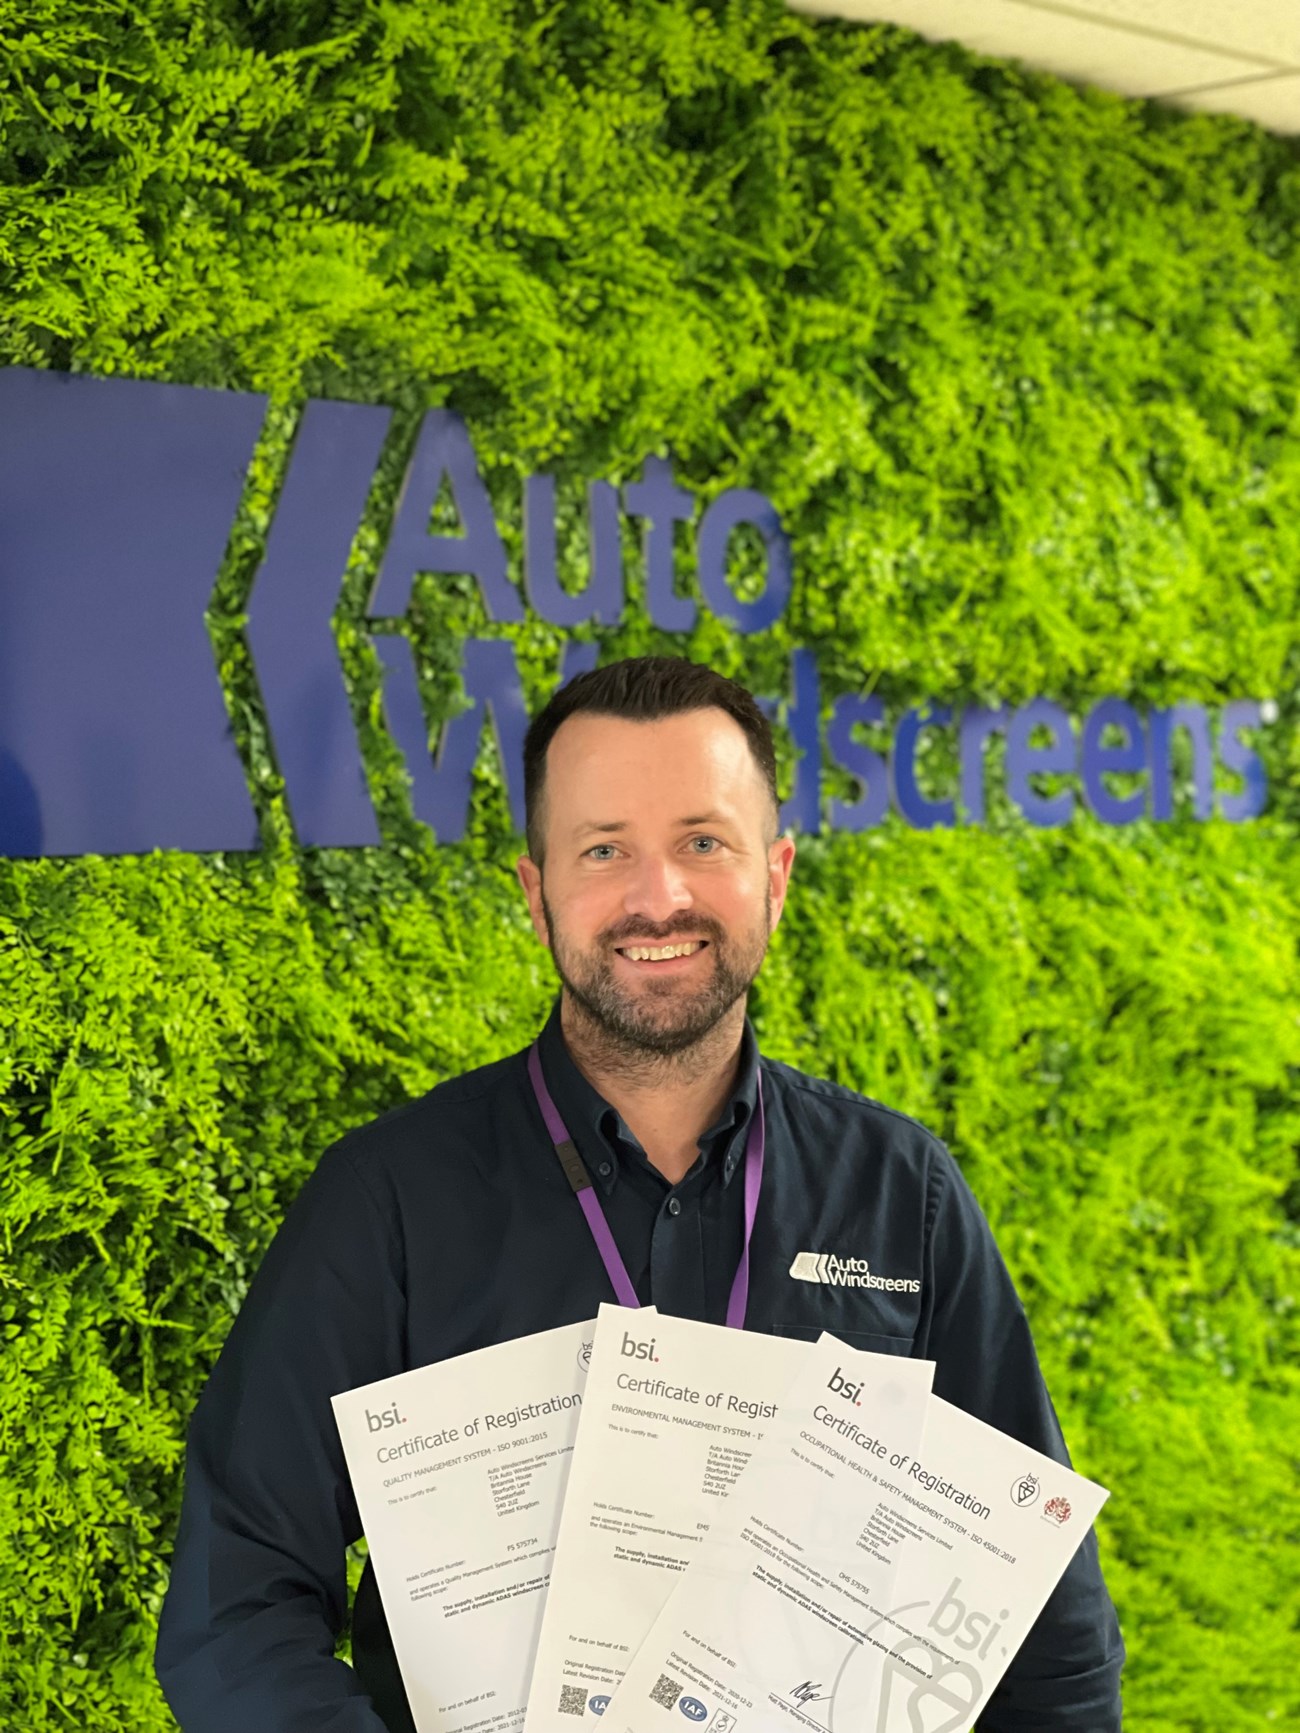 Bruce with accreditations - HR.jpg